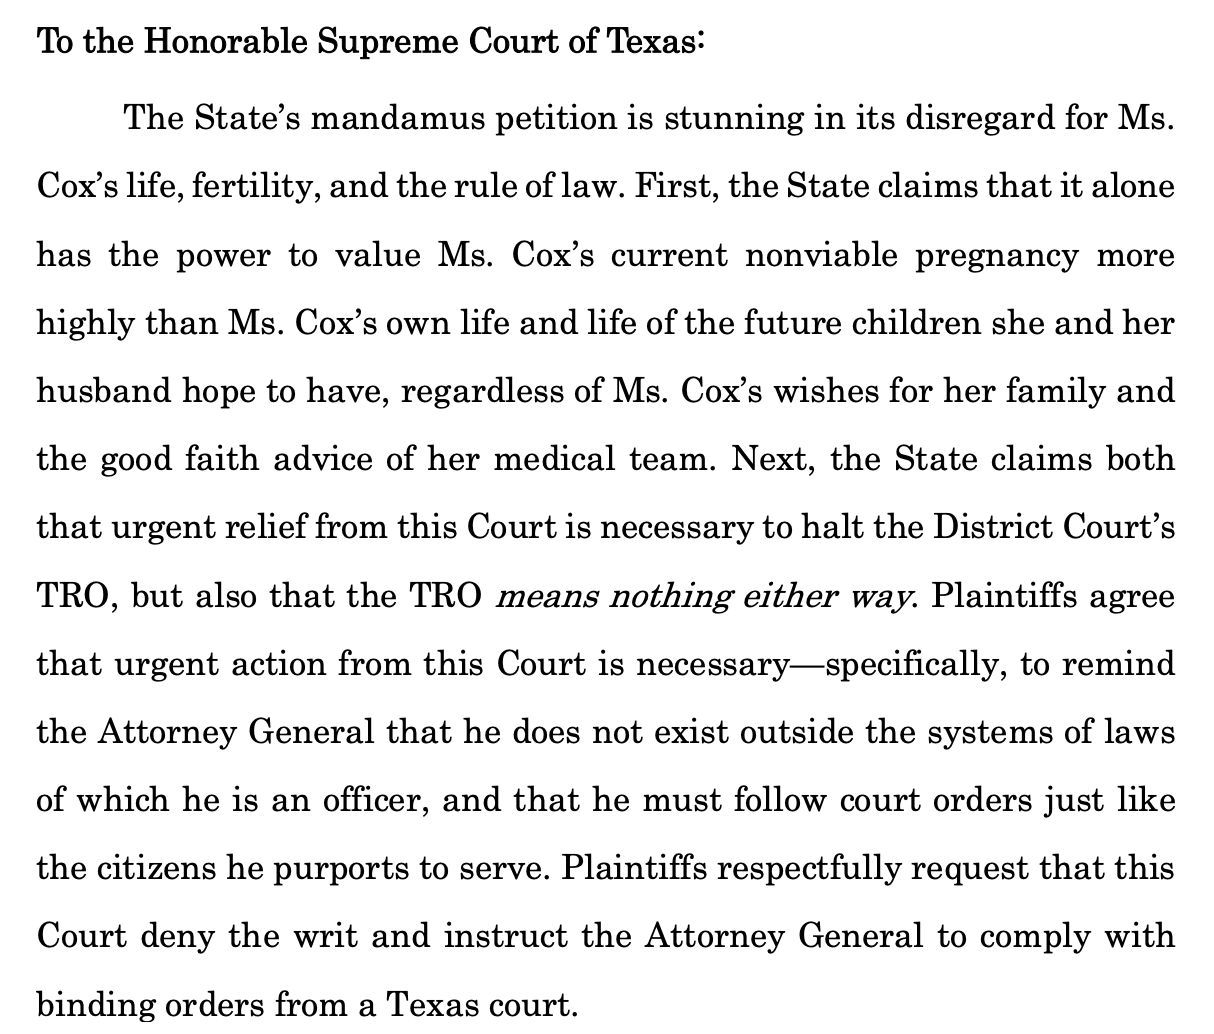 To the Honorable Supreme Court of Texas: The State’s mandamus petition is stunning in its disregard for Ms. Cox’s life, fertility, and the rule of law. First, the State claims that it alone has the power to value Ms. Cox’s current nonviable pregnancy more highly than Ms. Cox’s own life and life of the future children she and her husband hope to have, regardless of Ms. Cox’s wishes for her family and the good faith advice of her medical team. Next, the State claims both that urgent relief from this Court is necessary to halt the District Court’s TRO, but also that the TRO means nothing either way. Plaintiffs agree that urgent action from this Court is necessary—specifically, to remind the Attorney General that he does not exist outside the systems of laws of which he is an officer, and that he must follow court orders just like the citizens he purports to serve. Plaintiffs respectfully request that this Court deny the writ and instruct the Attorney General to comply with binding orders from a Texas court. 